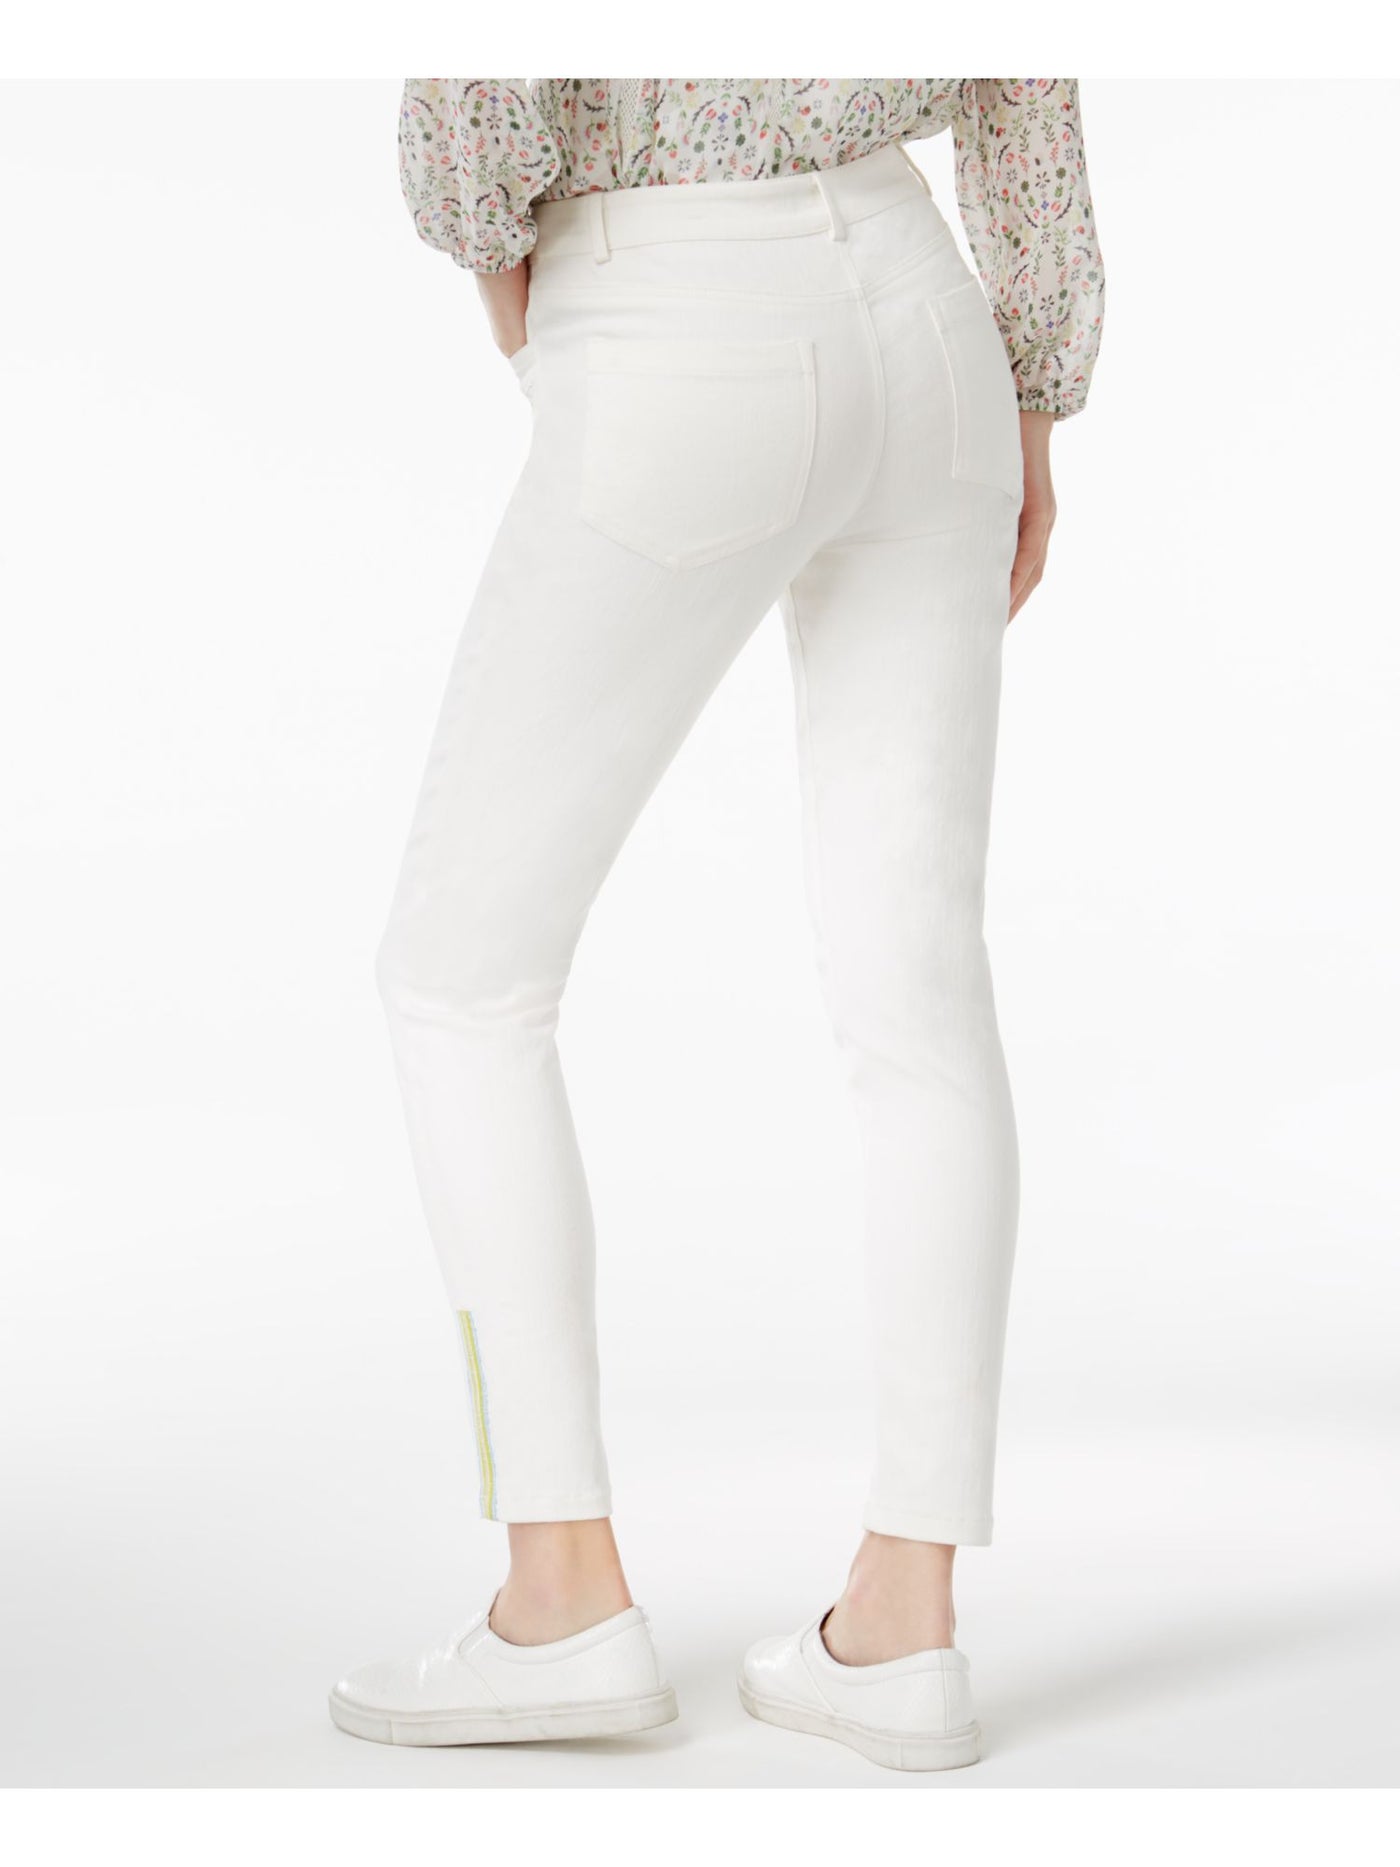 CYNTHIA ROWLEY Womens White Embroidered Pants 10